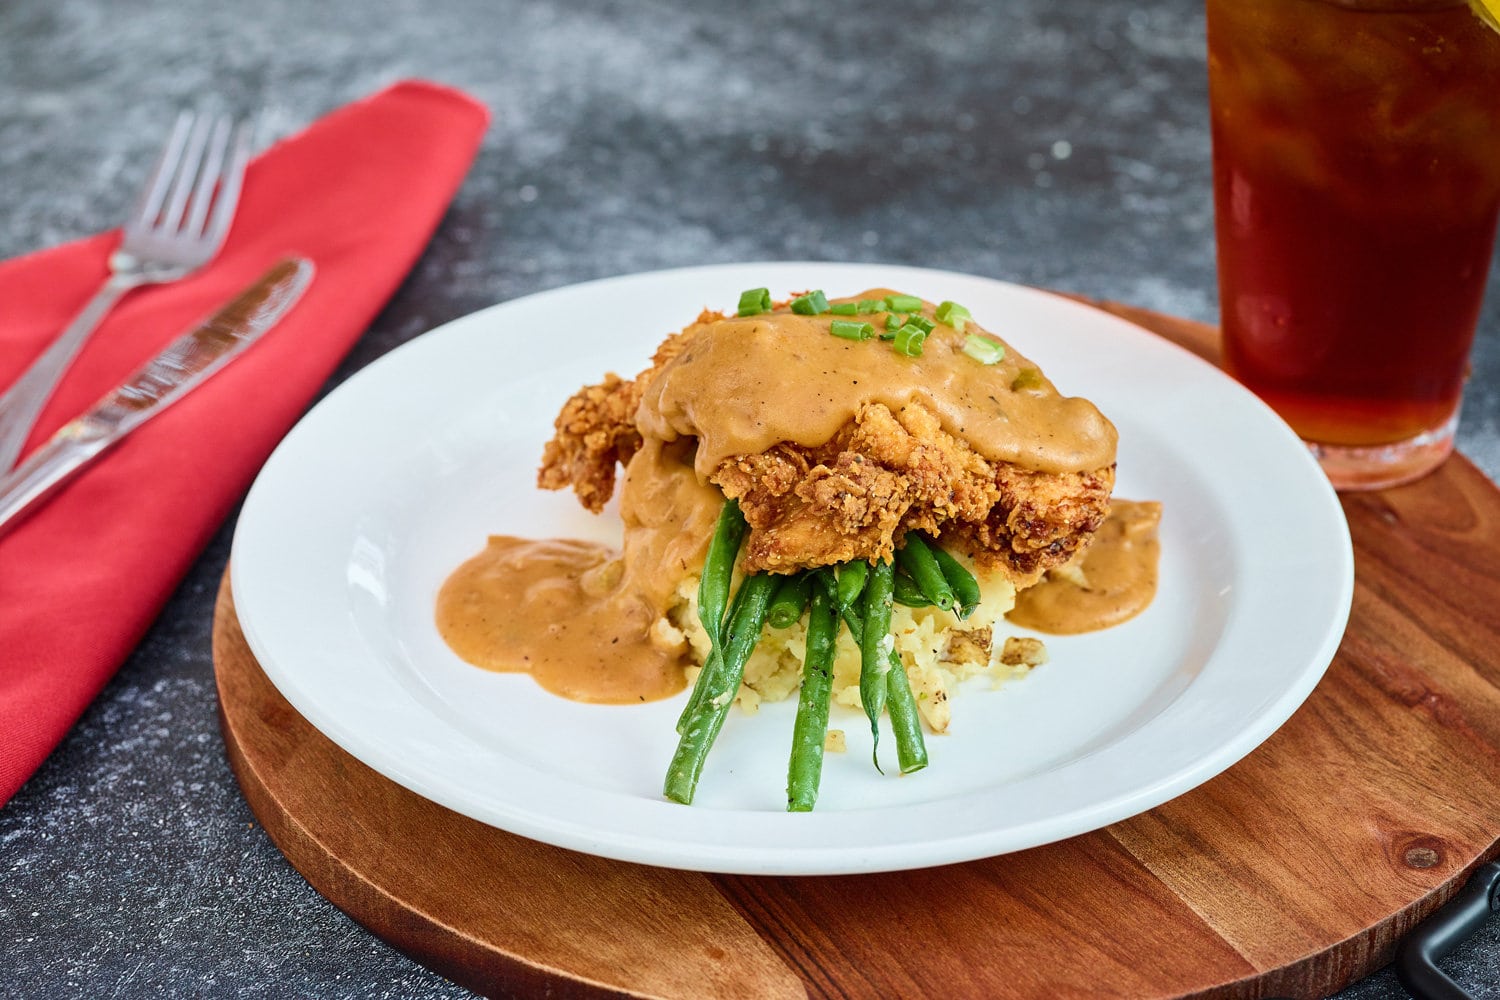 Southern Fried Chicken Marinated and hand breaded chicken breast, smothered in creole gravy.